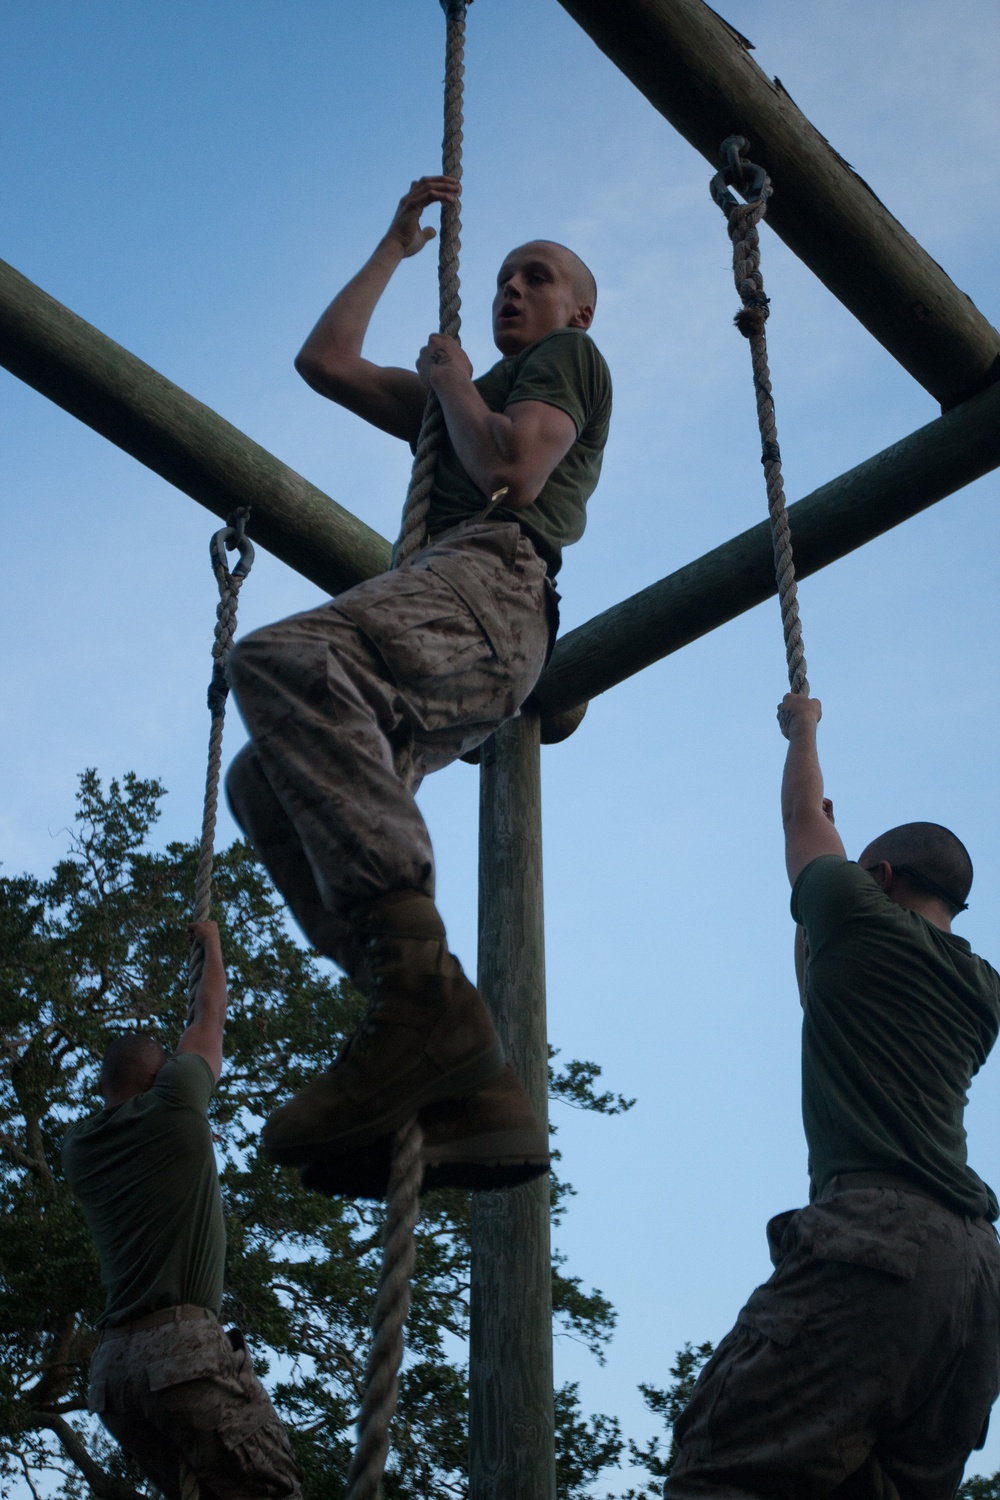 Photo Gallery: Parris Island obstacle course bested by Marine recruits